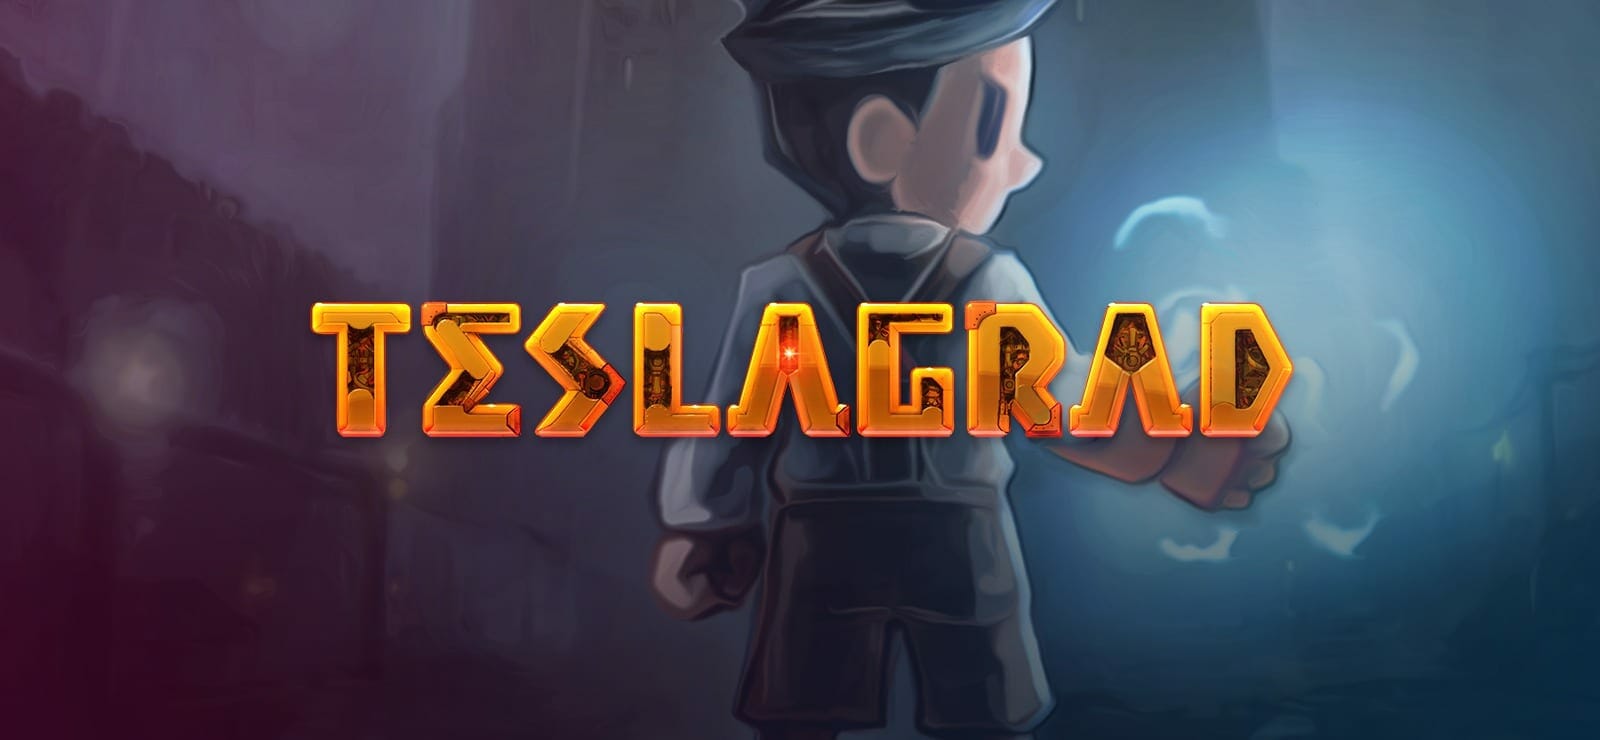 Teslagrad for Mobile Devices